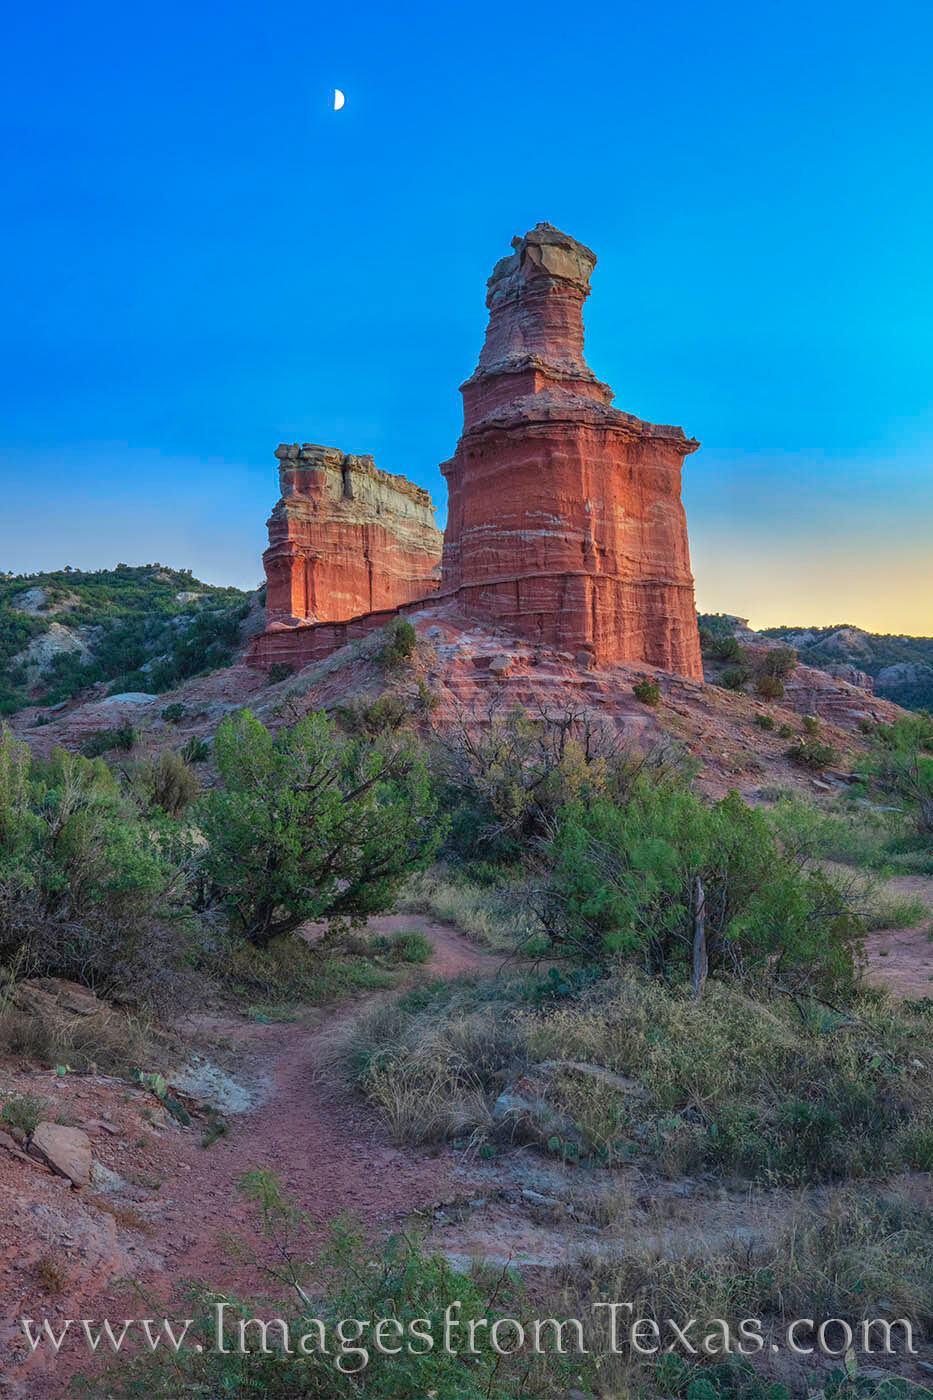 A half-moon hangs over the Lighthouse hoodoo in Palo Duro Canyon. I hadn’t planned on shooting the moon here, but it was a...